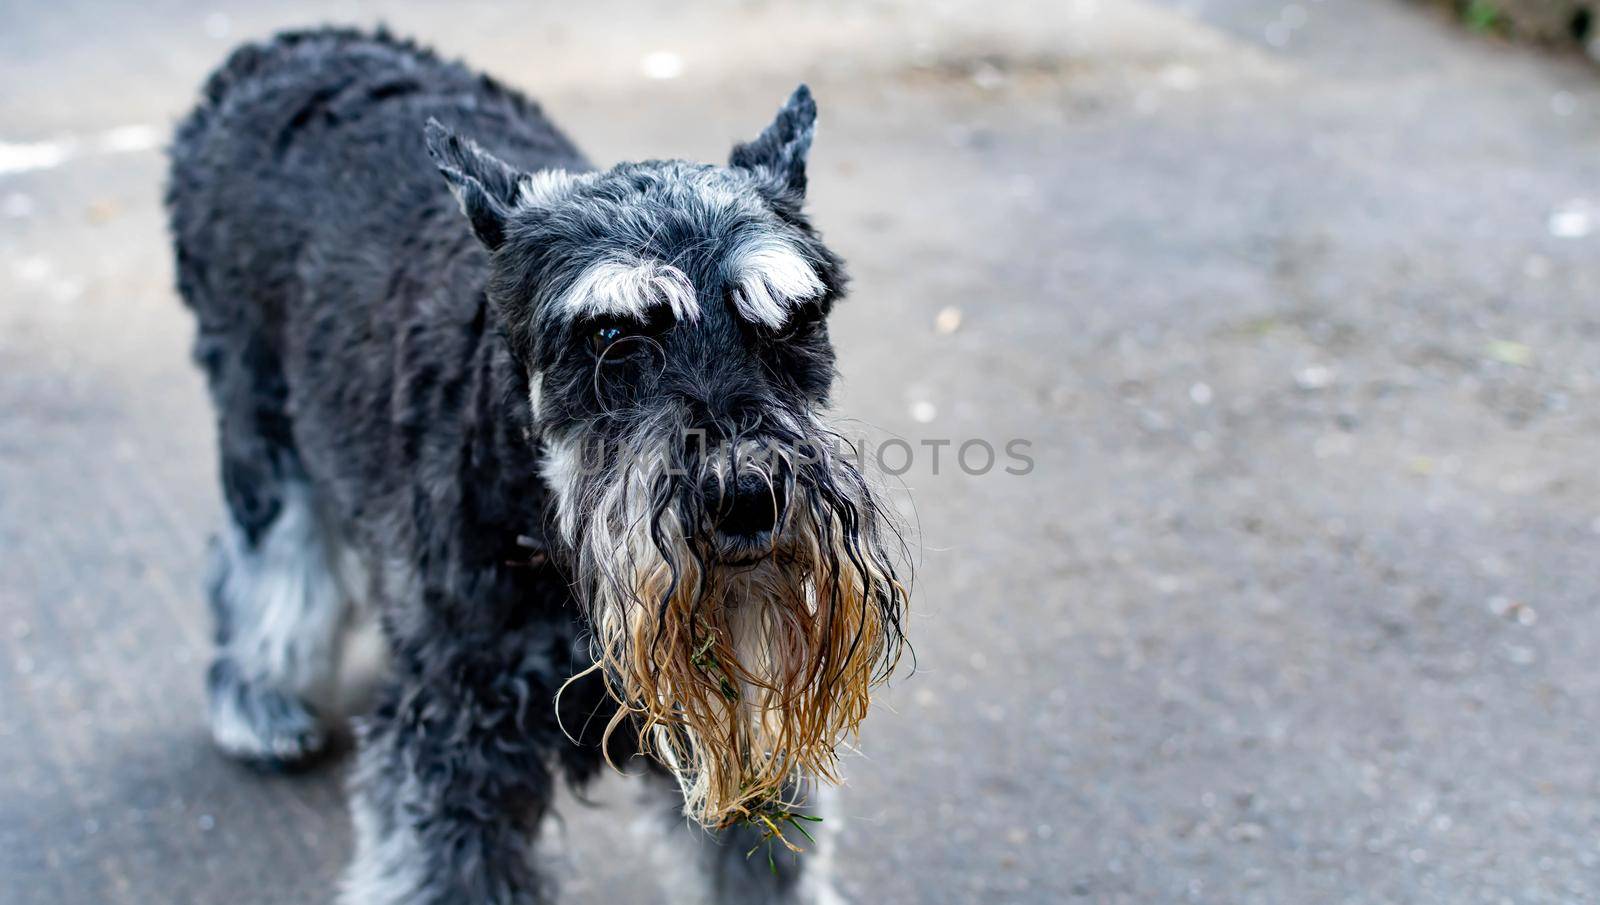 A cute Miniature Schnauzer with wet and dirty beard after playing in a pond with grass